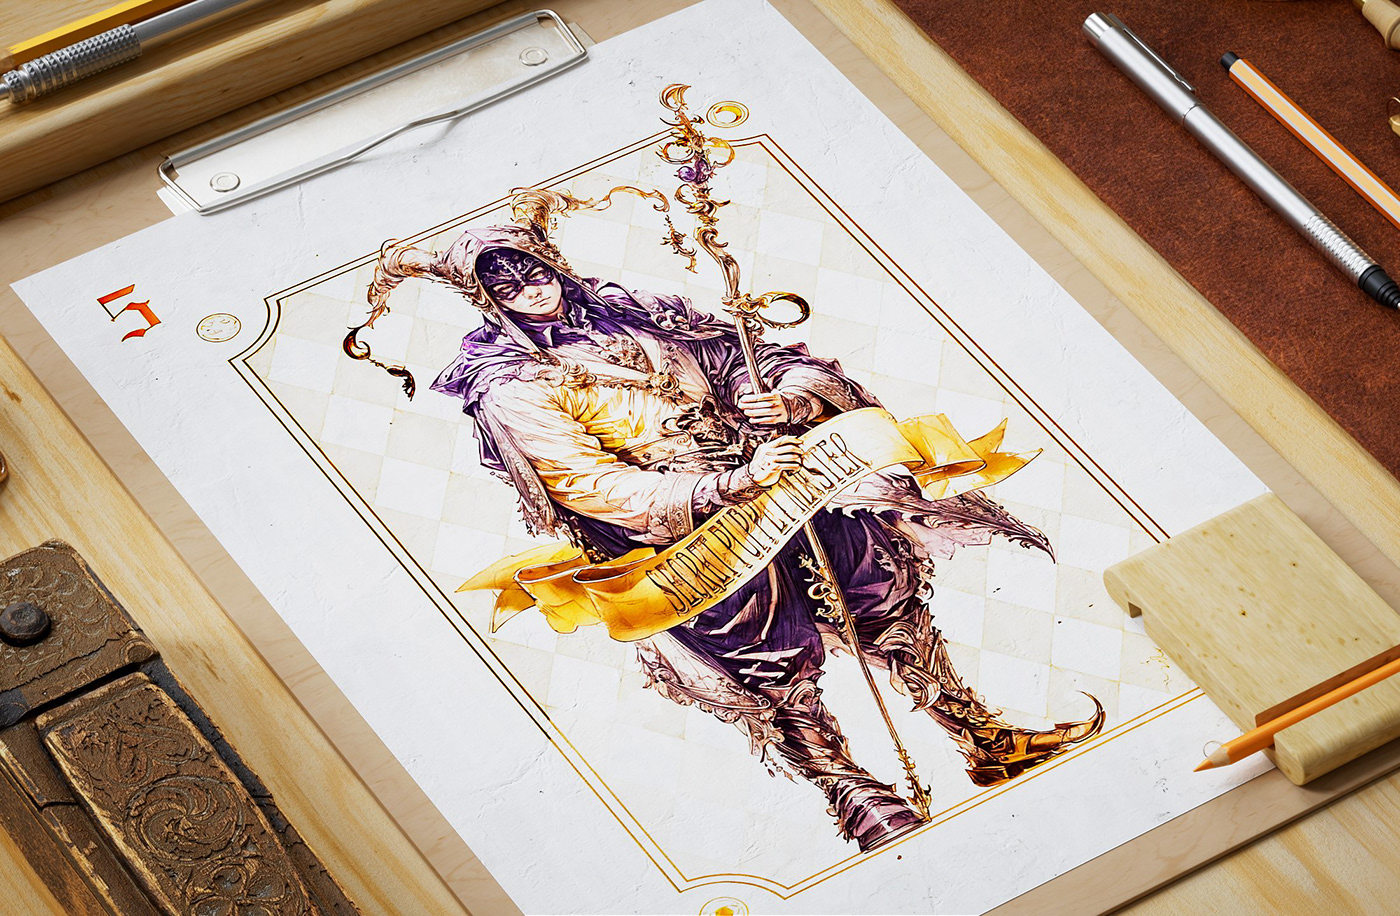 joker 诡秘之主 playcards game Character design  Drawing  sketch concept art painting   portrait